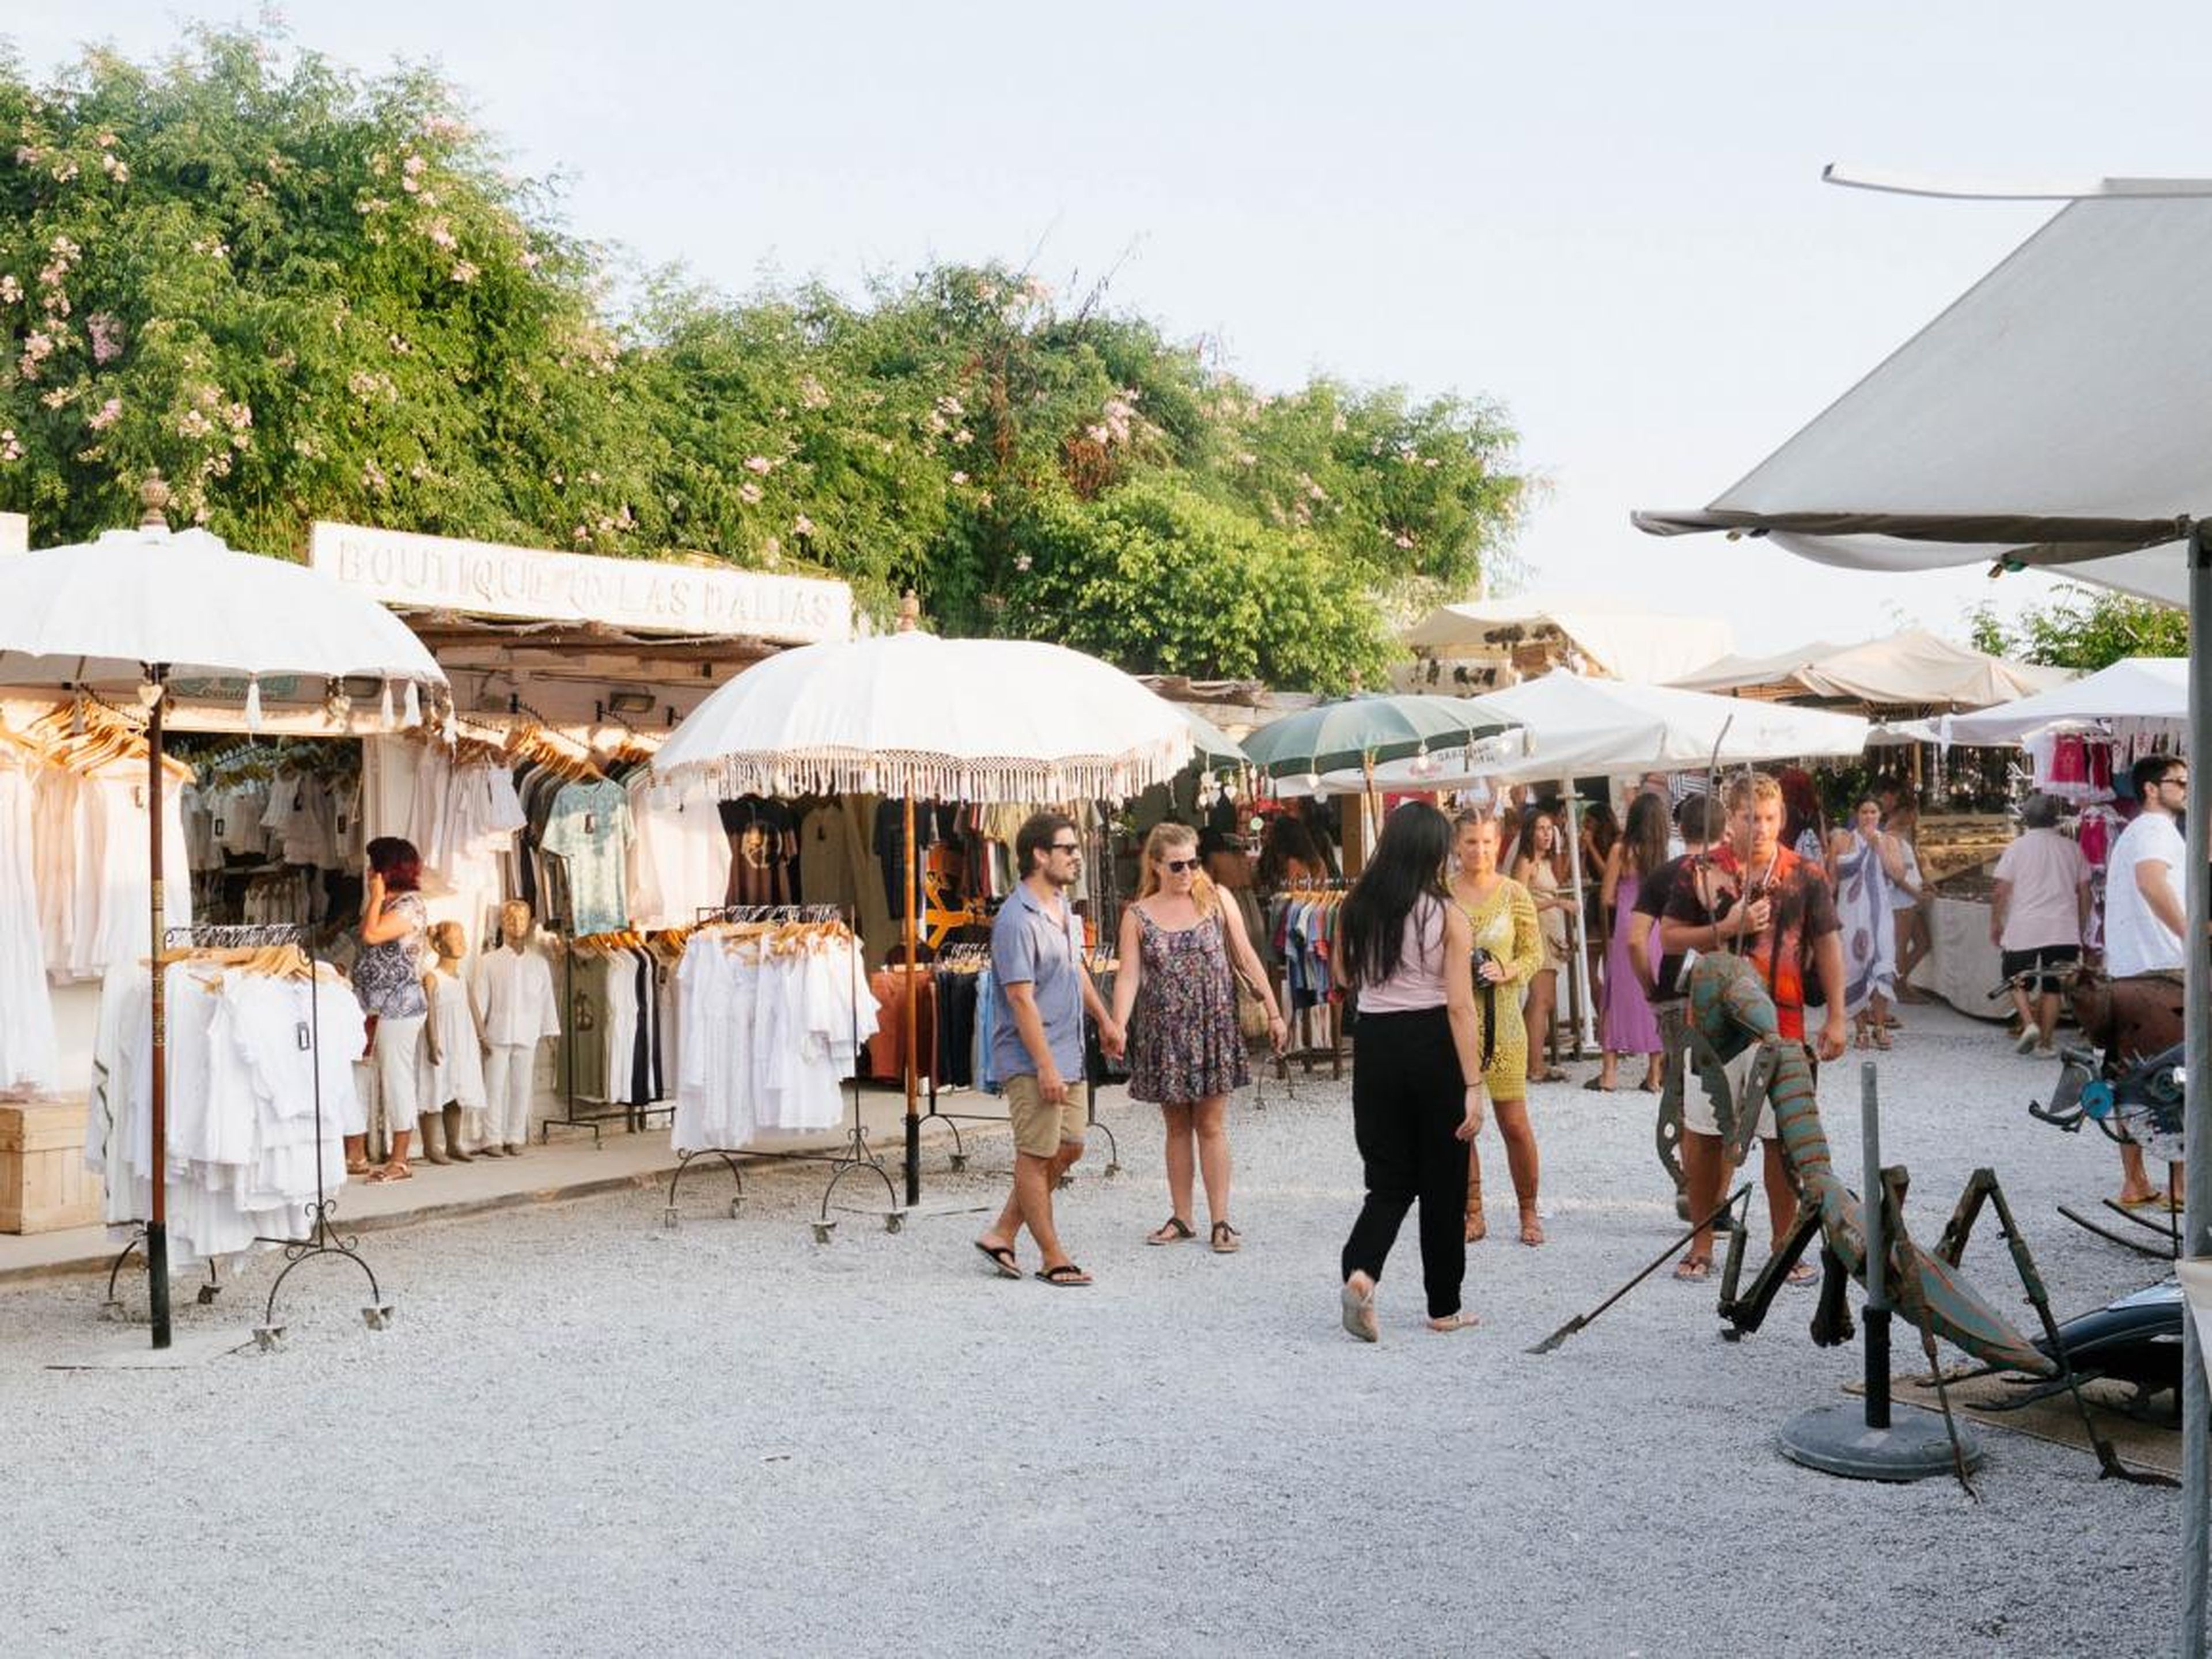 While Ibiza has its share of haute couture shops (no Louis Vuitton, though), what I really appreciated about the island was its tradition of hippy markets, like Las Dalias. On Saturdays, locals set up stalls and sell their